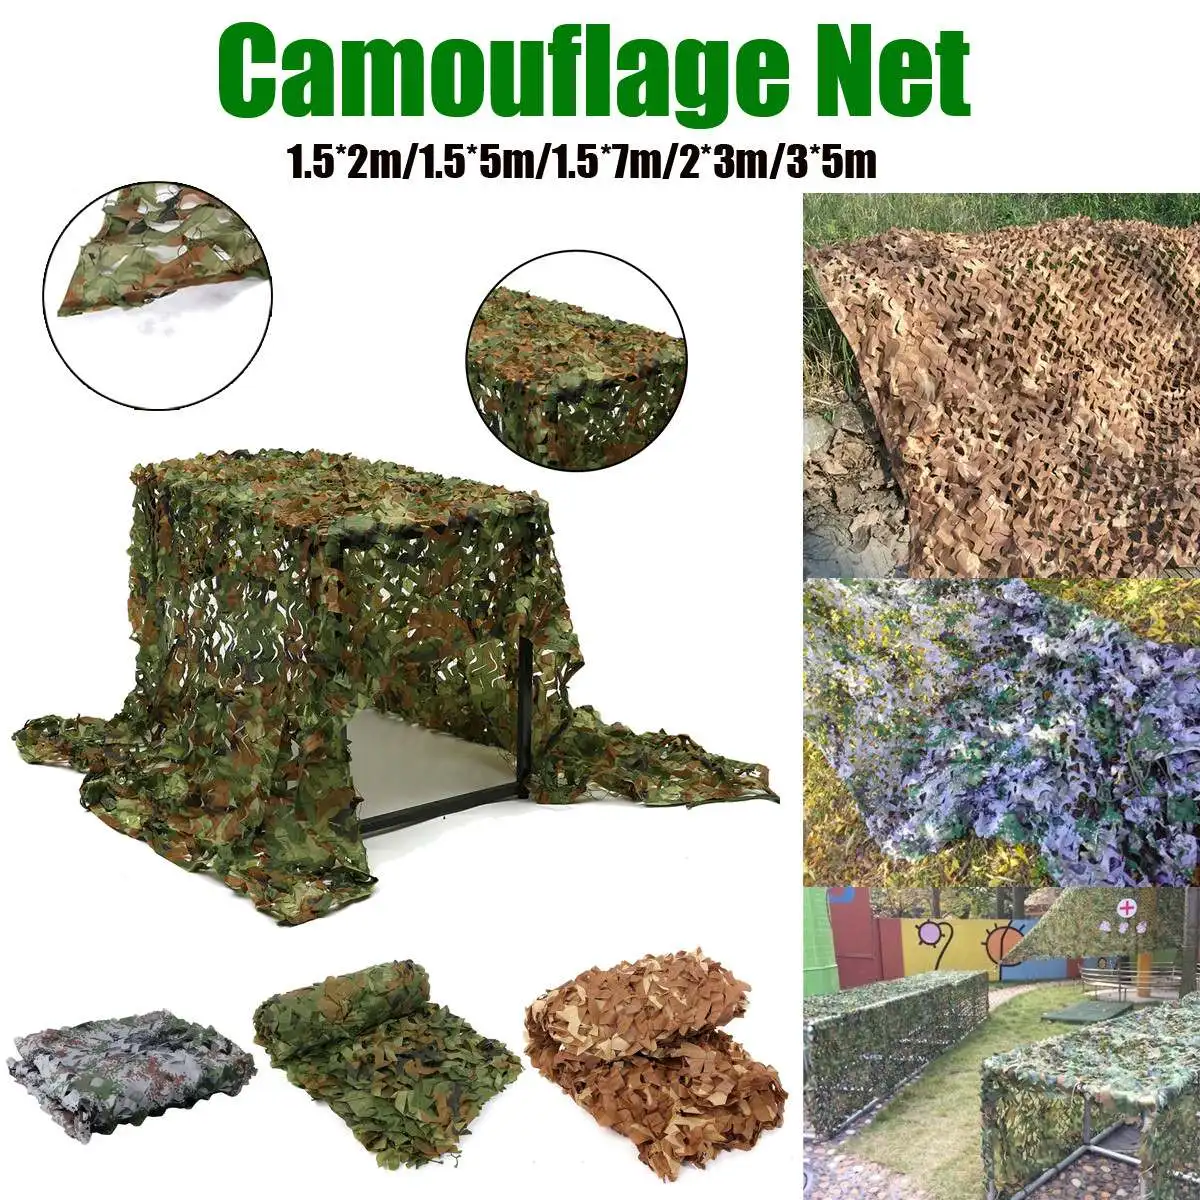 

3x3 3x4 3x5 3x6 4x6 150D 120g Polyester Oxford Fabric PET Fibre Camouflage Camo Net Netting Hunting Sun Shade Car Cover